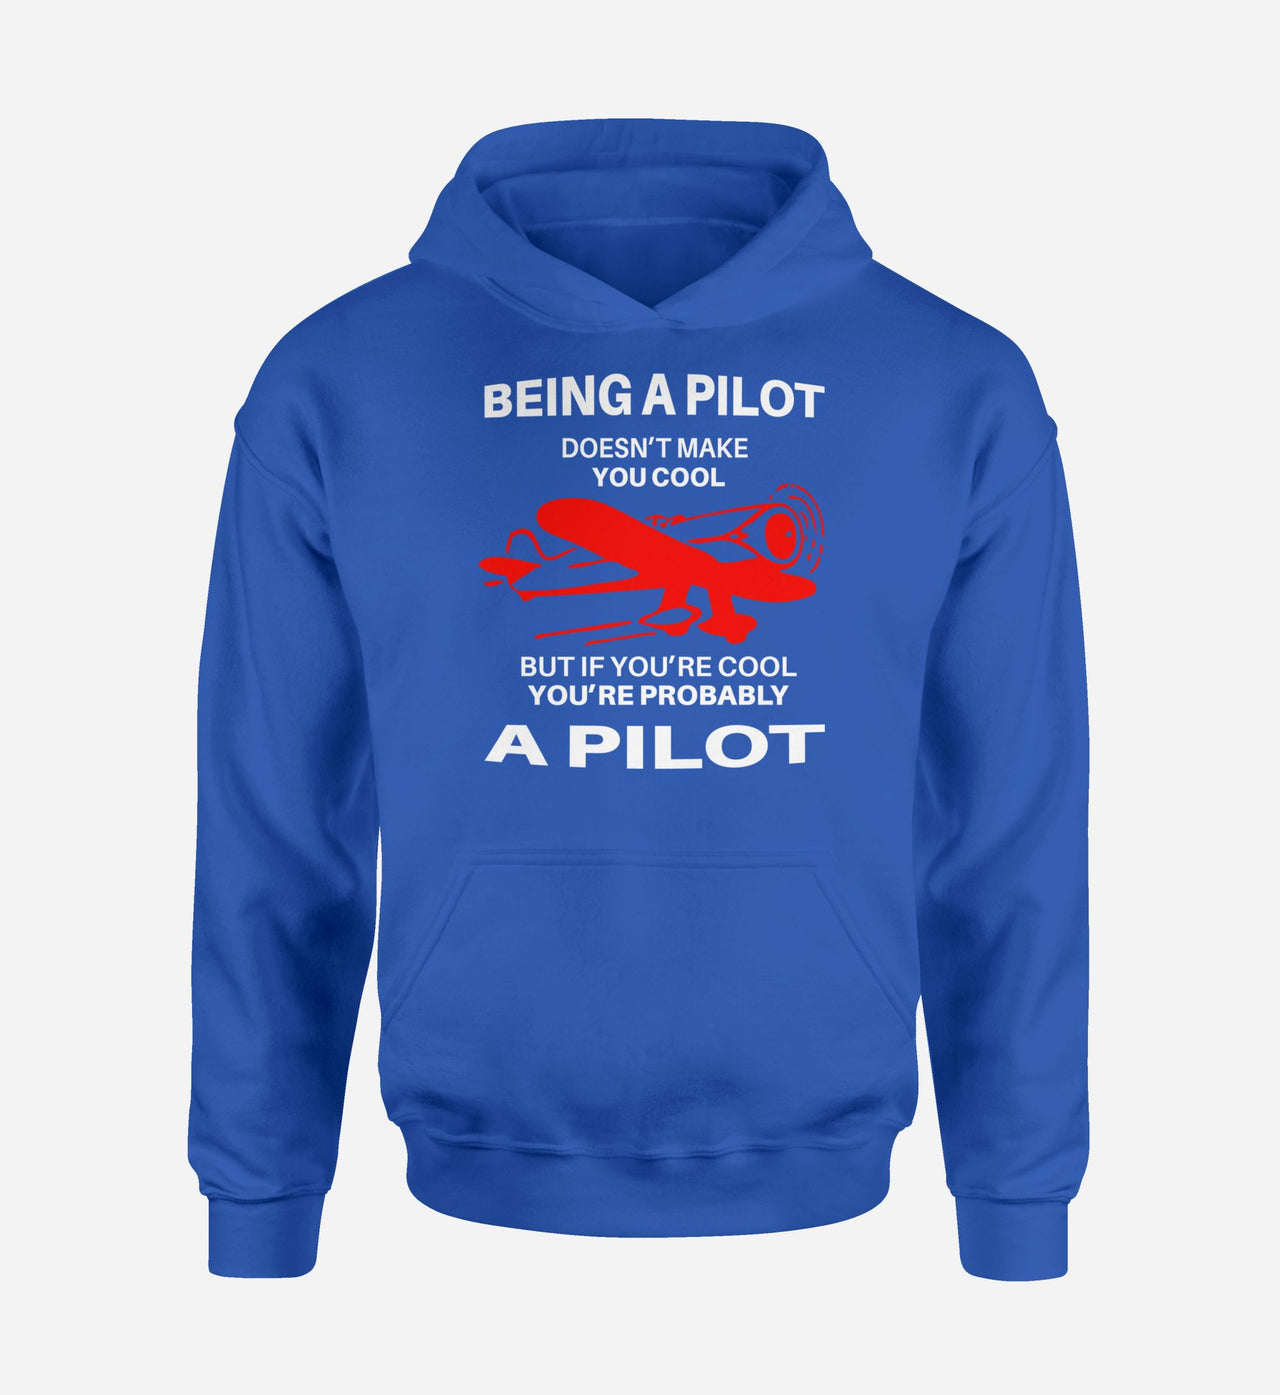 If You're Cool You're Probably a Pilot Designed Hoodies